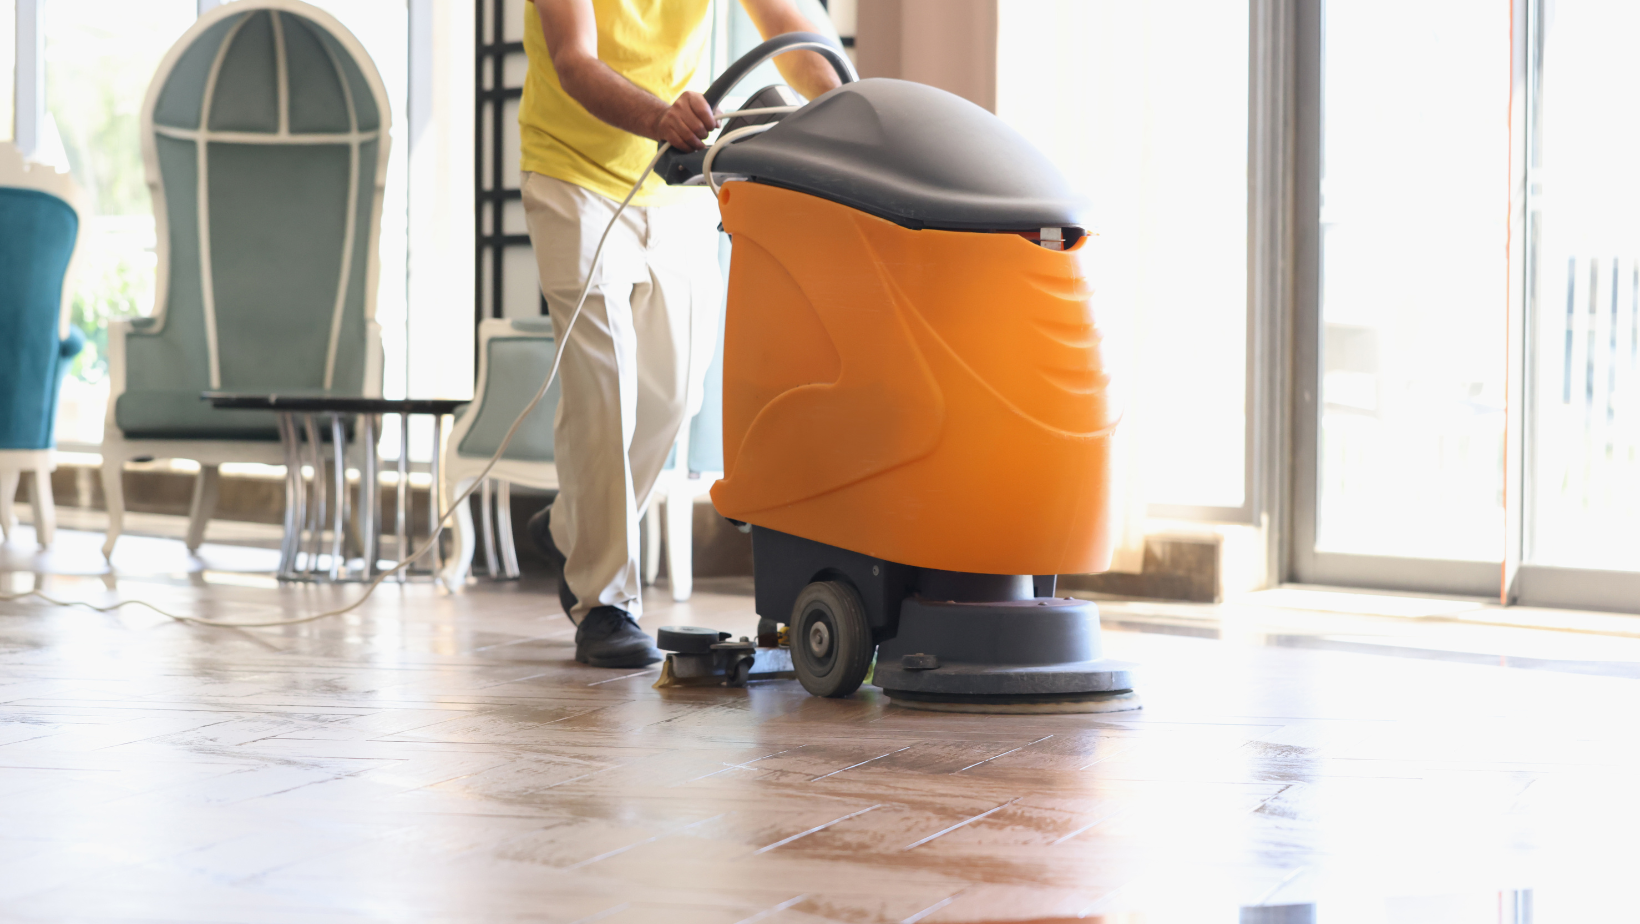 Selecting a Professional Cleaning Company That Optimizes On-Site Time